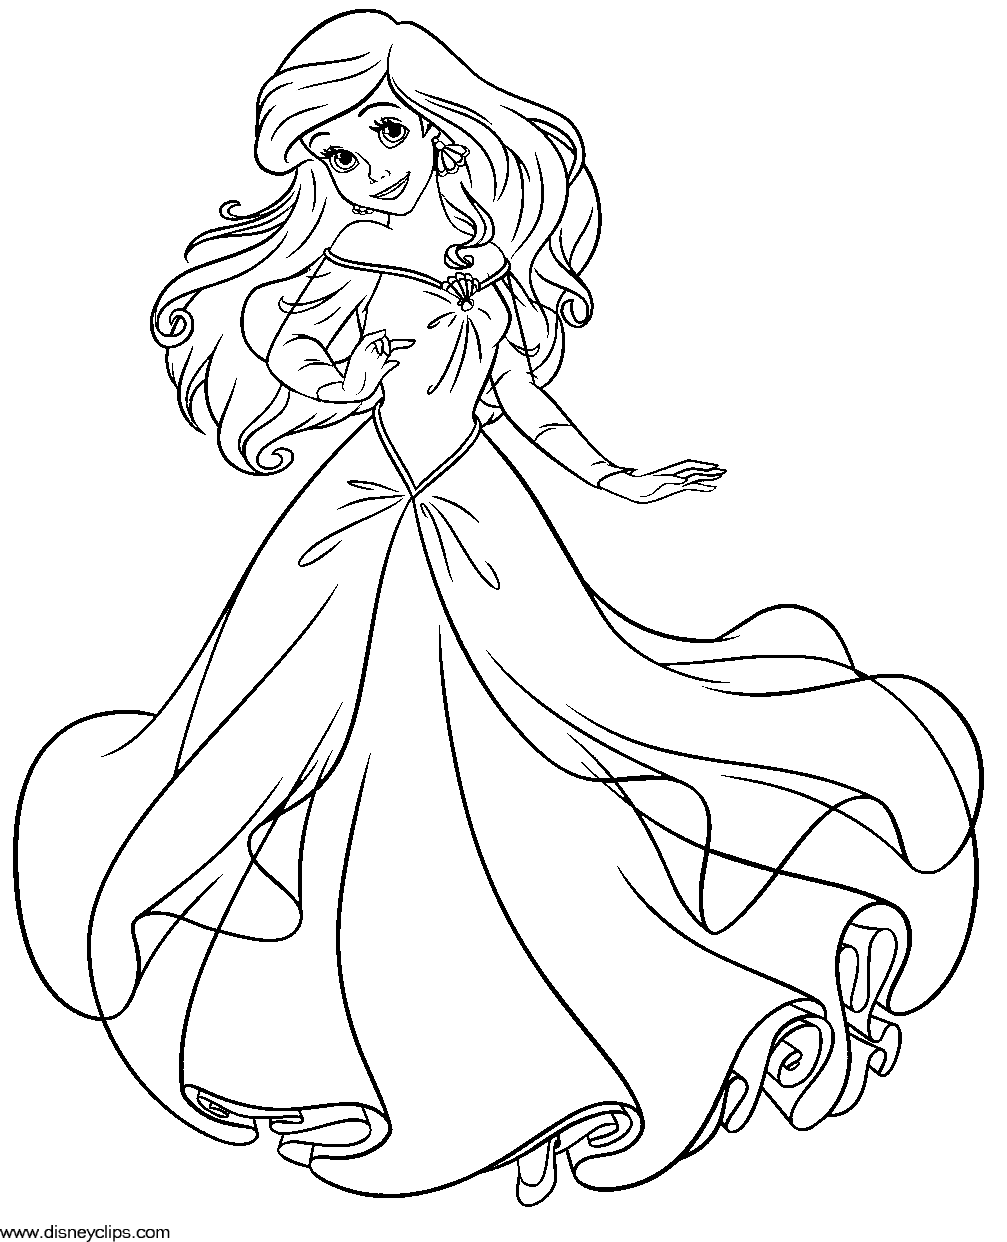 ariel picture to color ariel coloring pages to download and print for free ariel color picture to 